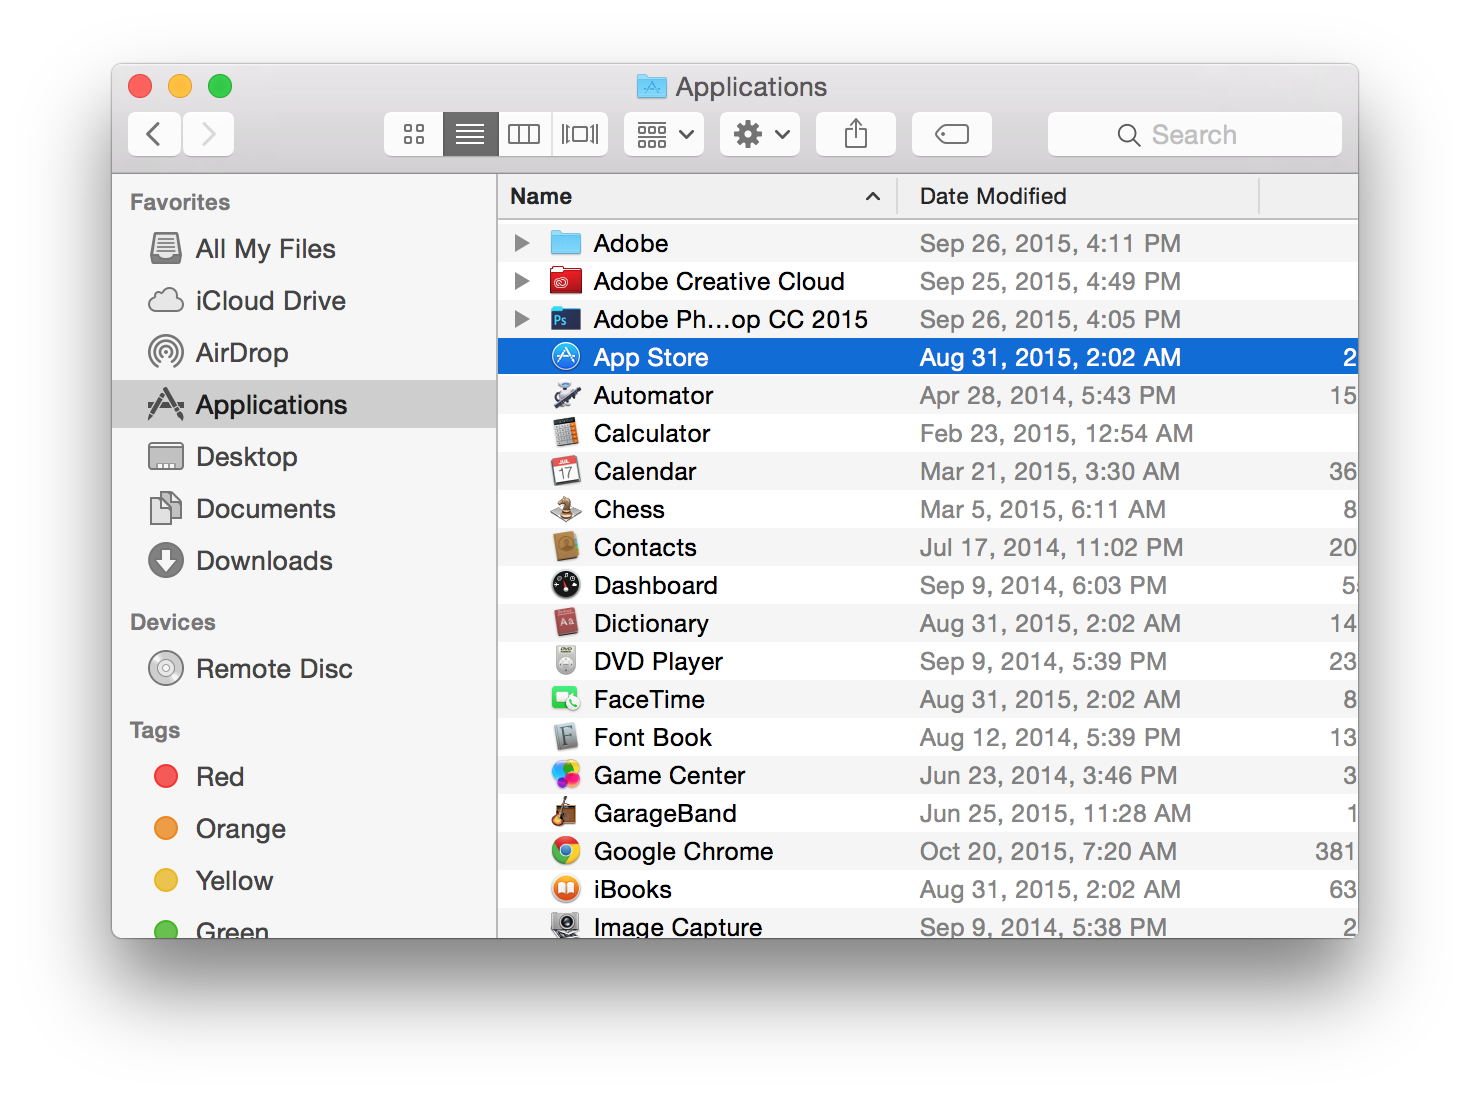 how to use remote desktop connection for mac